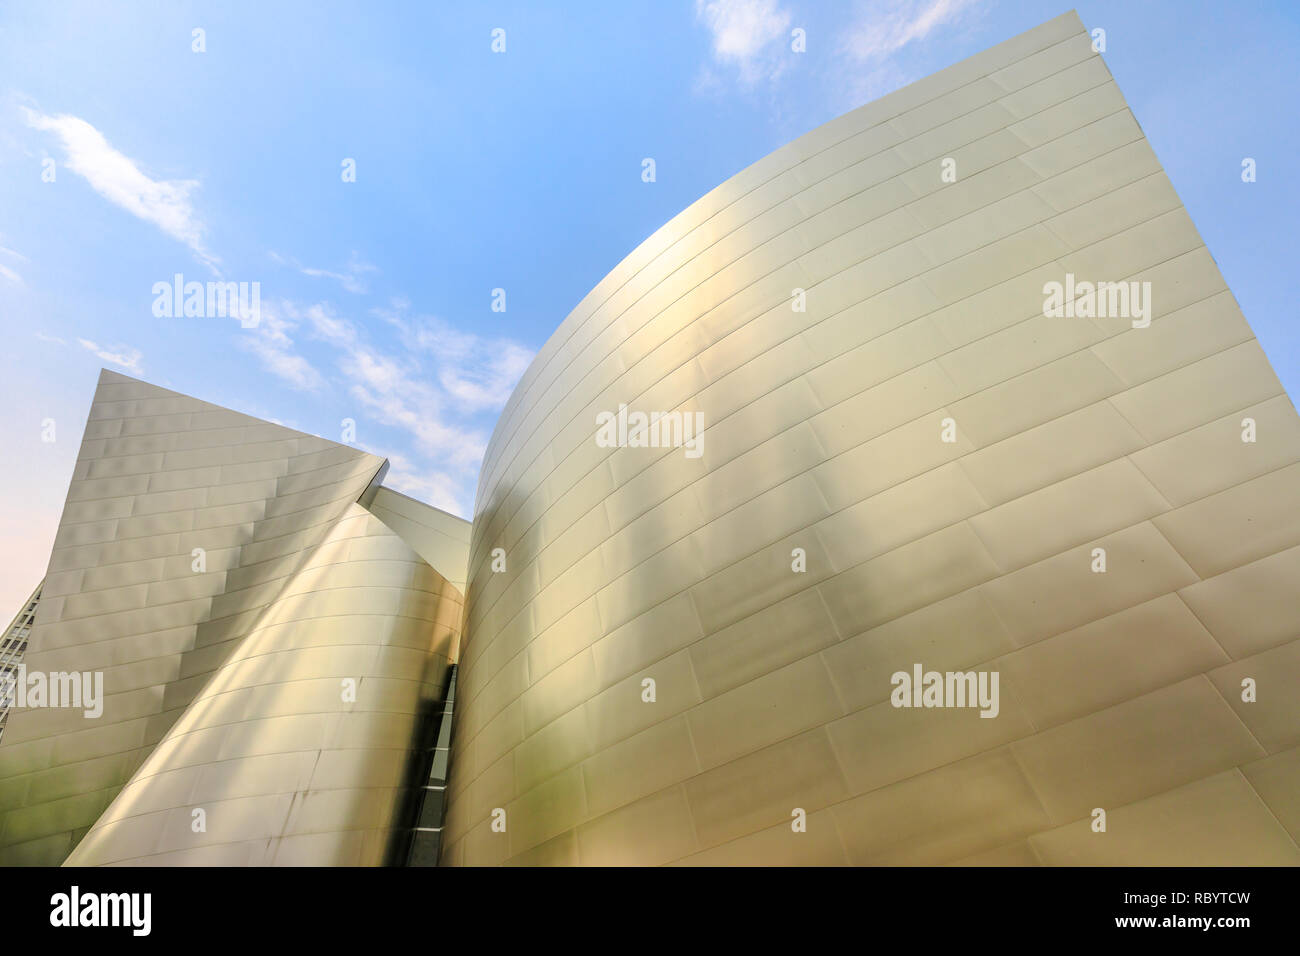 Los Angeles, California, United States - August 9, 2018: futuristic architecture background. Closeup of Walt Disney Concert Hall, by Frank Gehry, home to Los Angeles Philharmonic Orchestra and Choir. Stock Photo